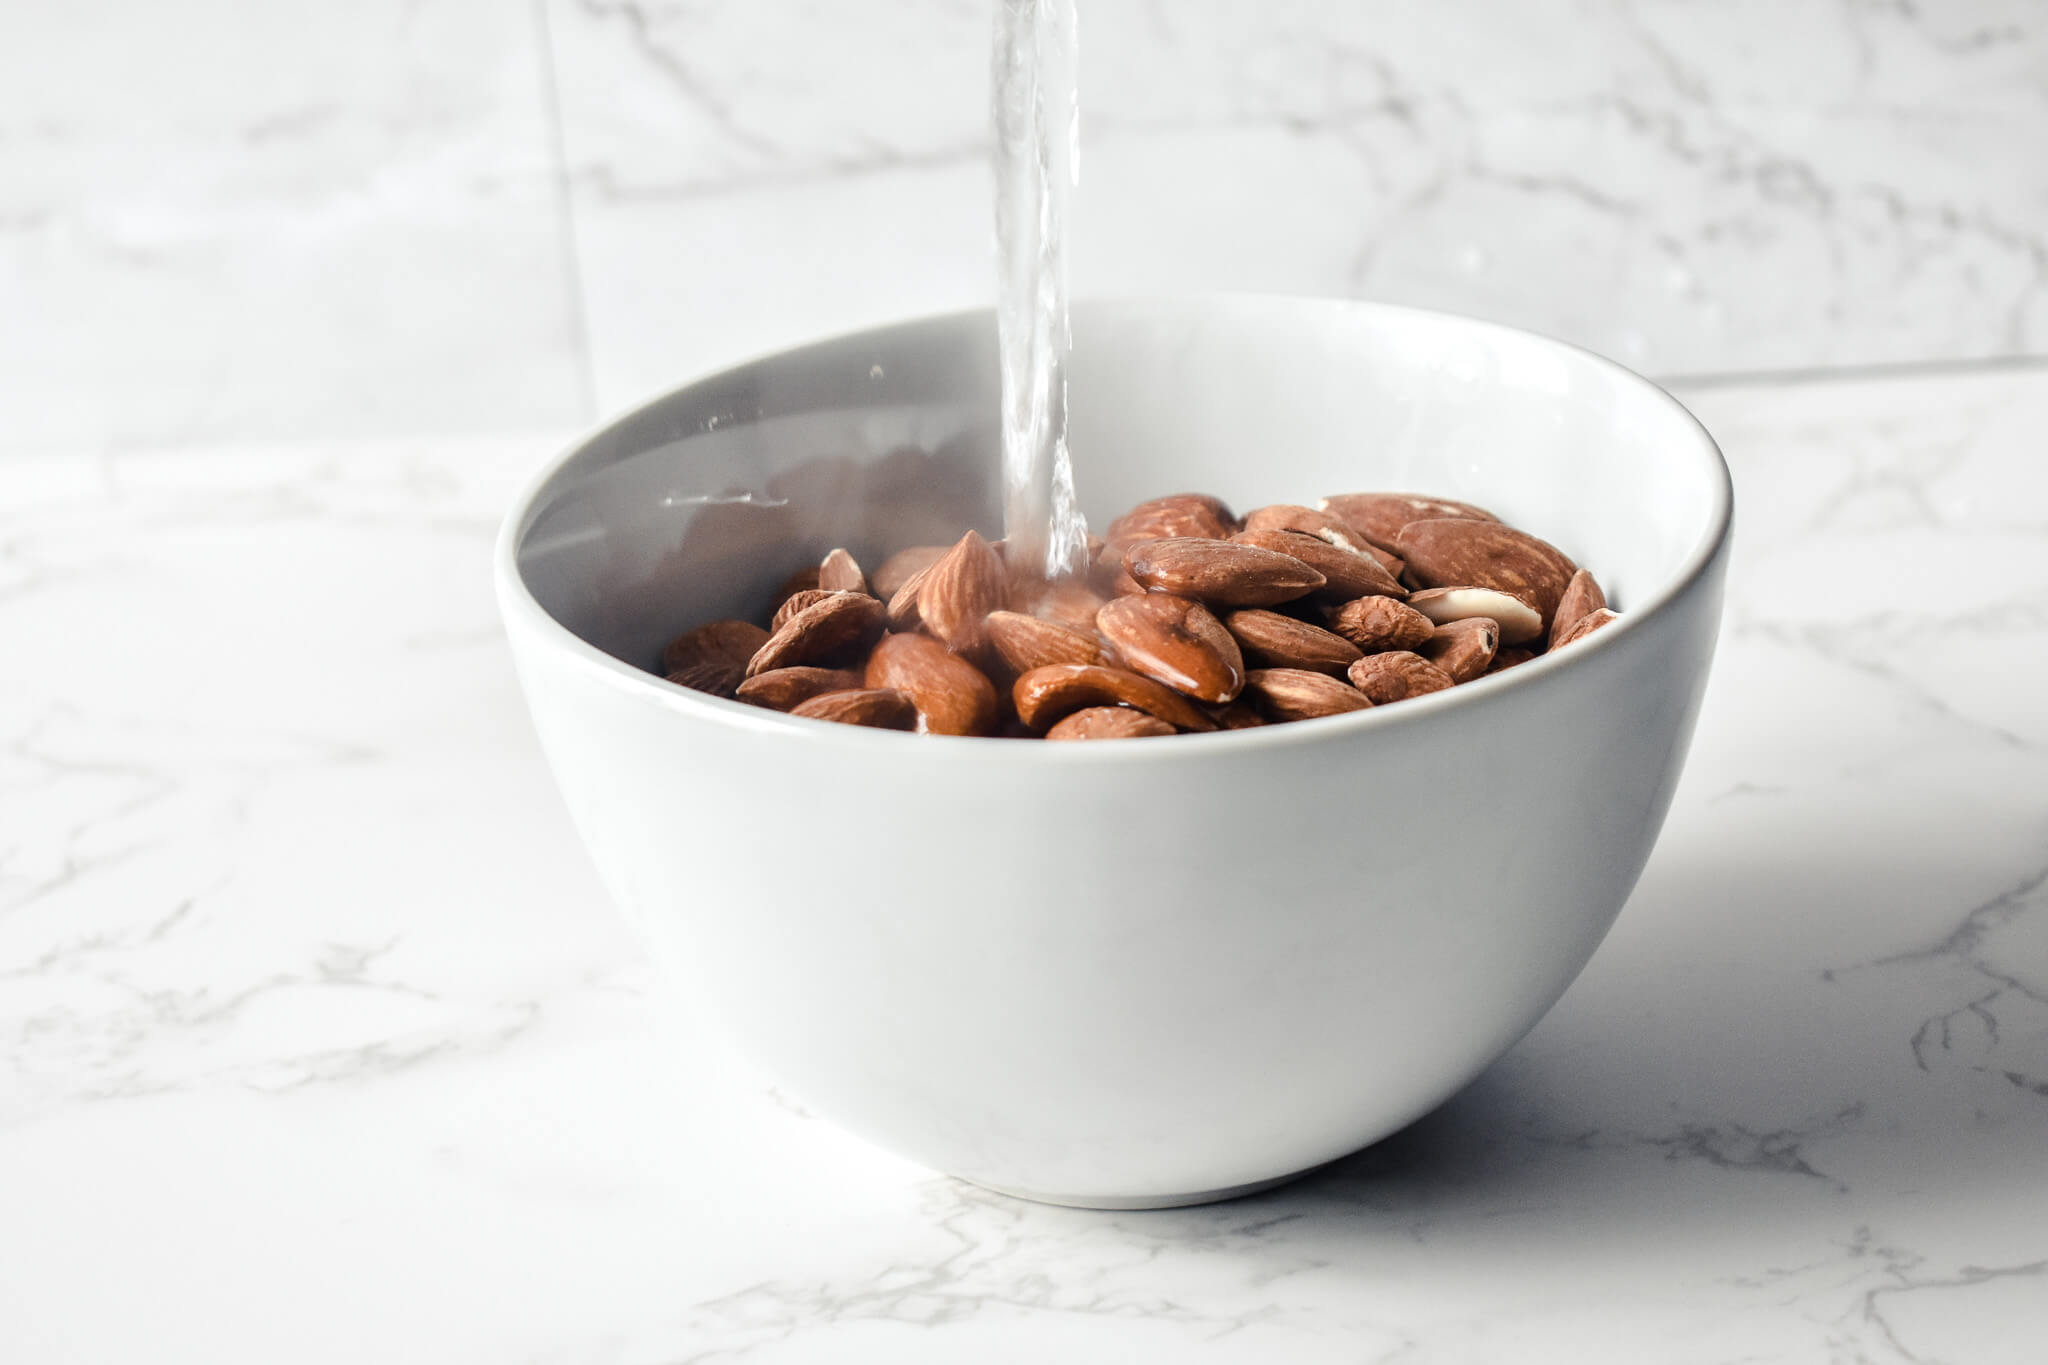 boiling water poured over almonds in bowl